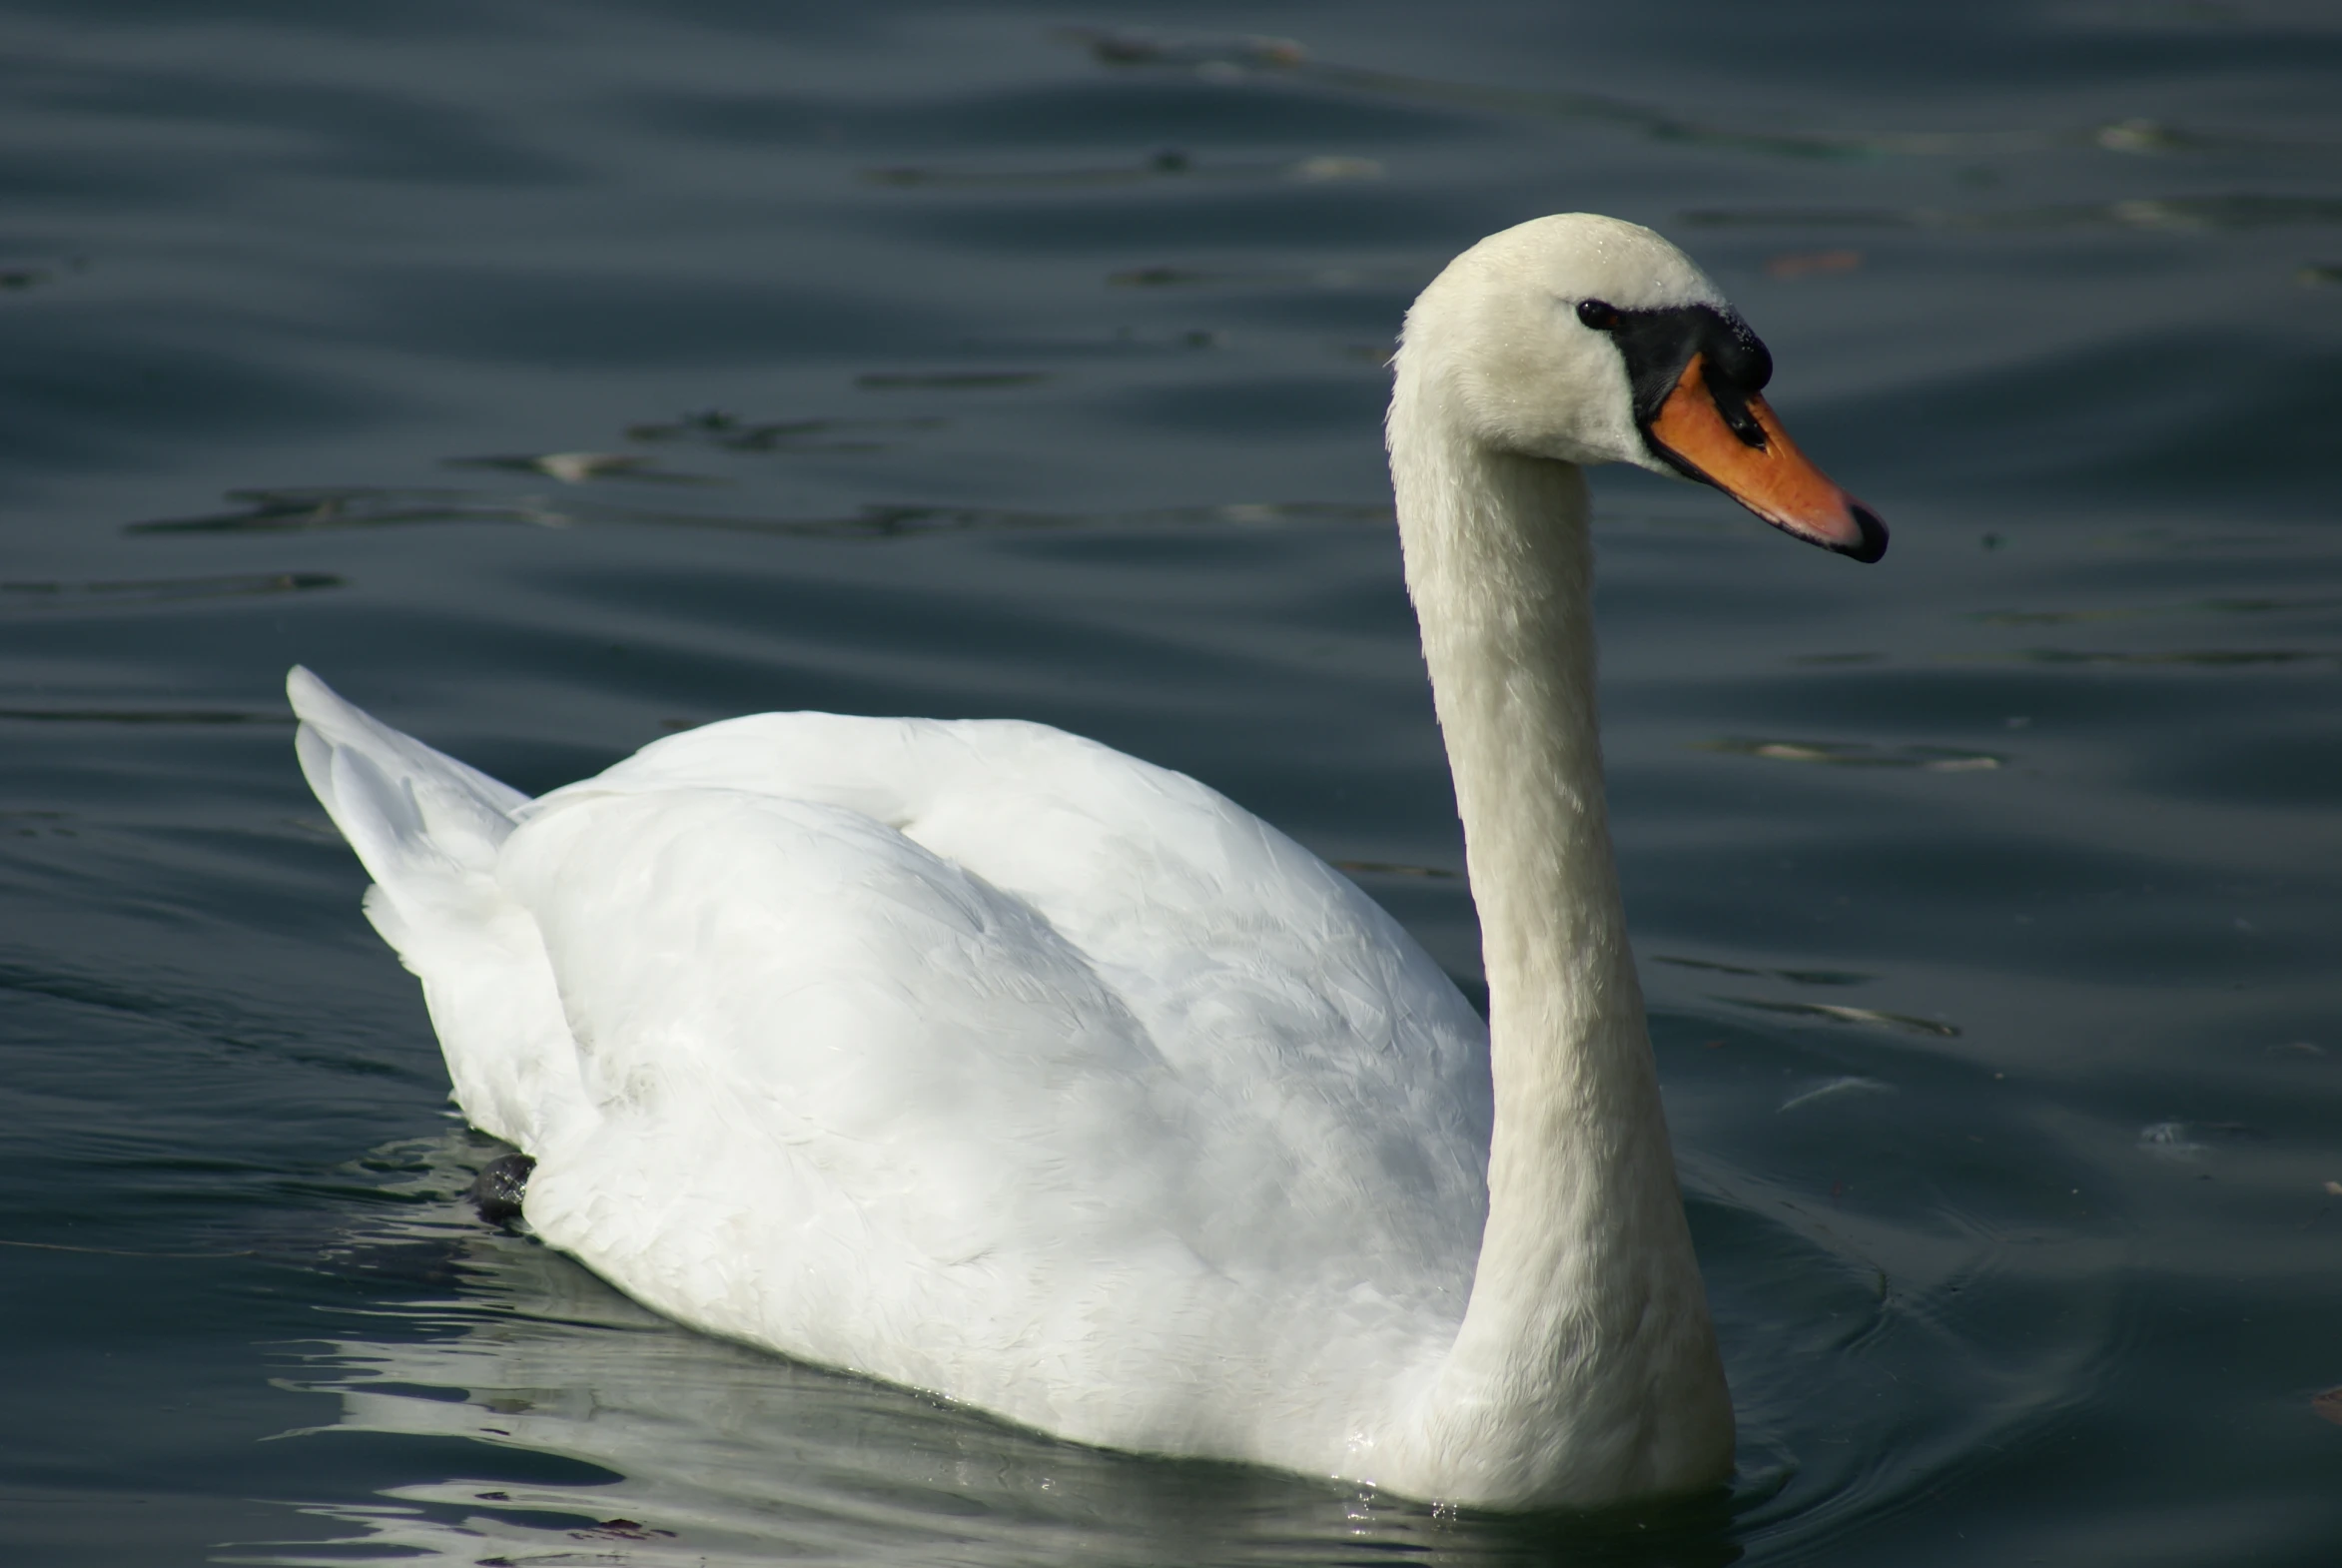 the white swan is in the water with its neck extended